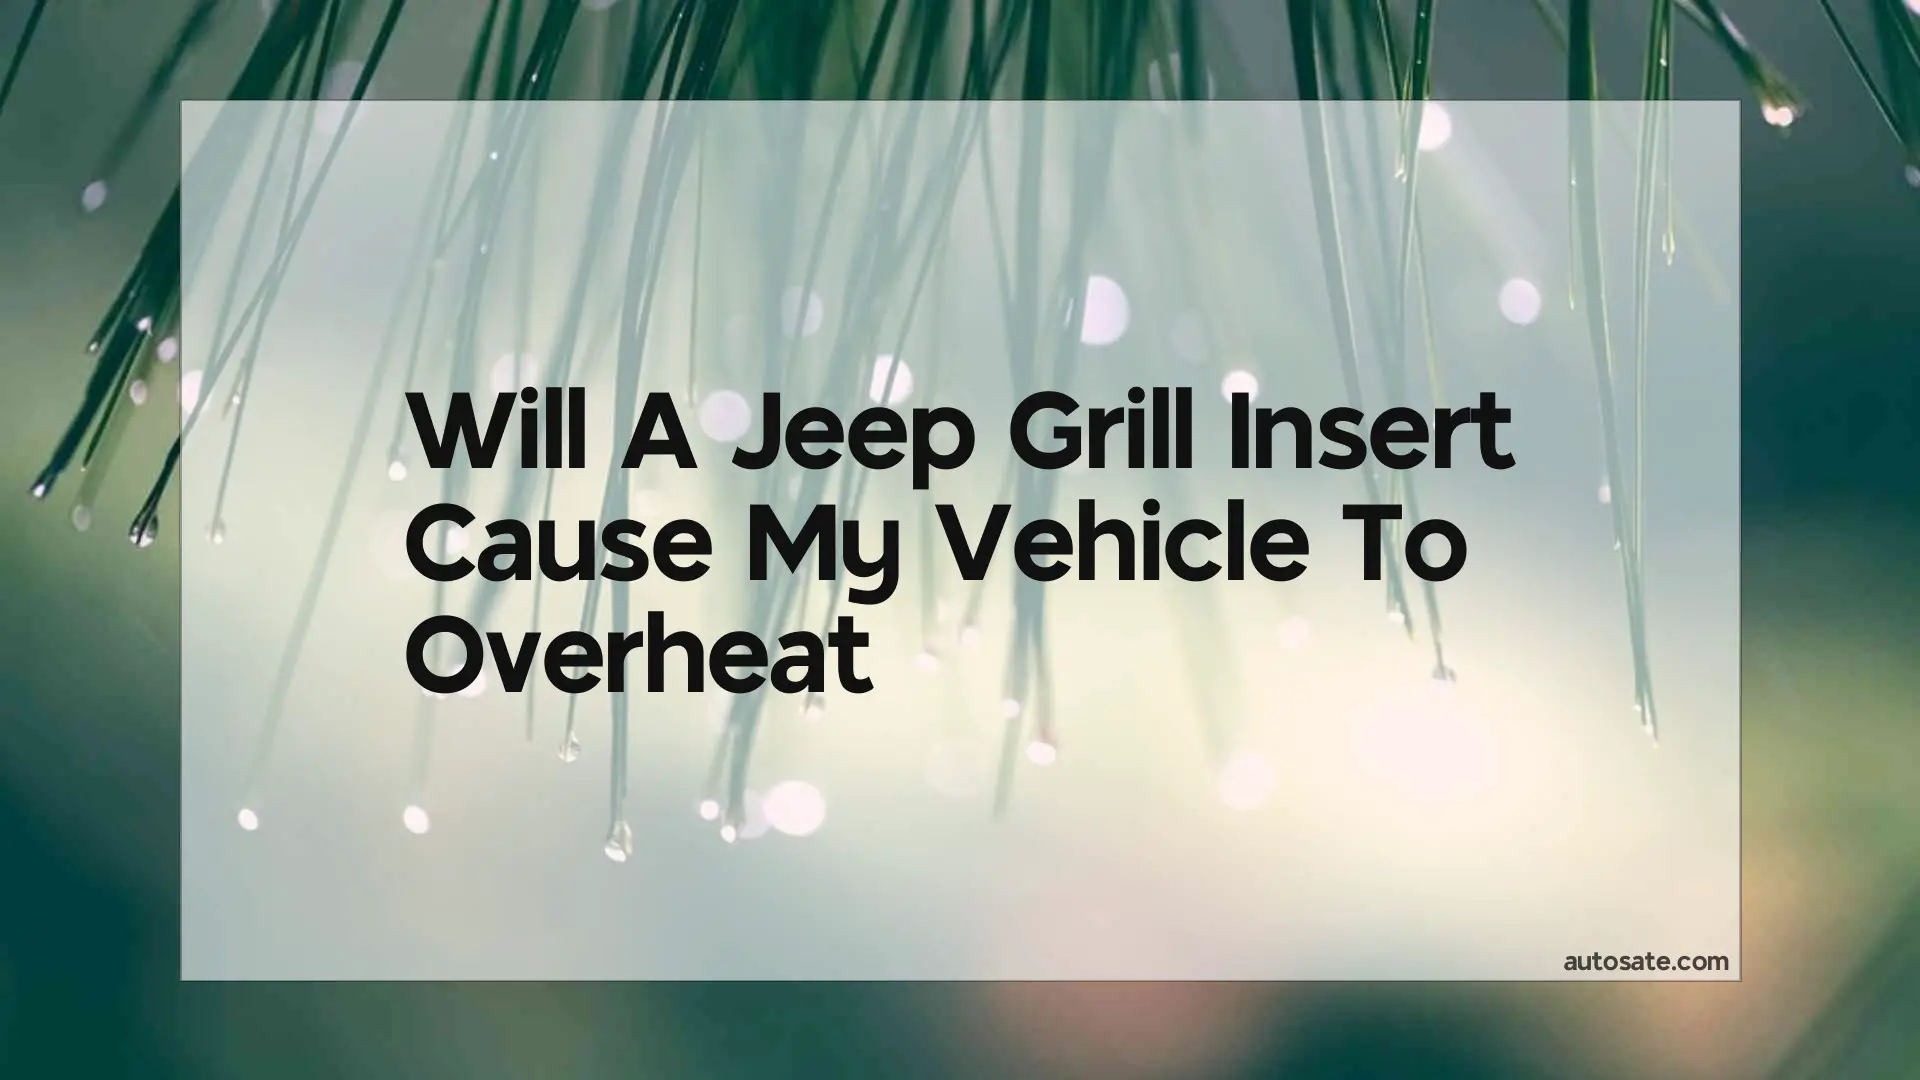 Will A Jeep Grill Insert Cause My Vehicle To Overheat